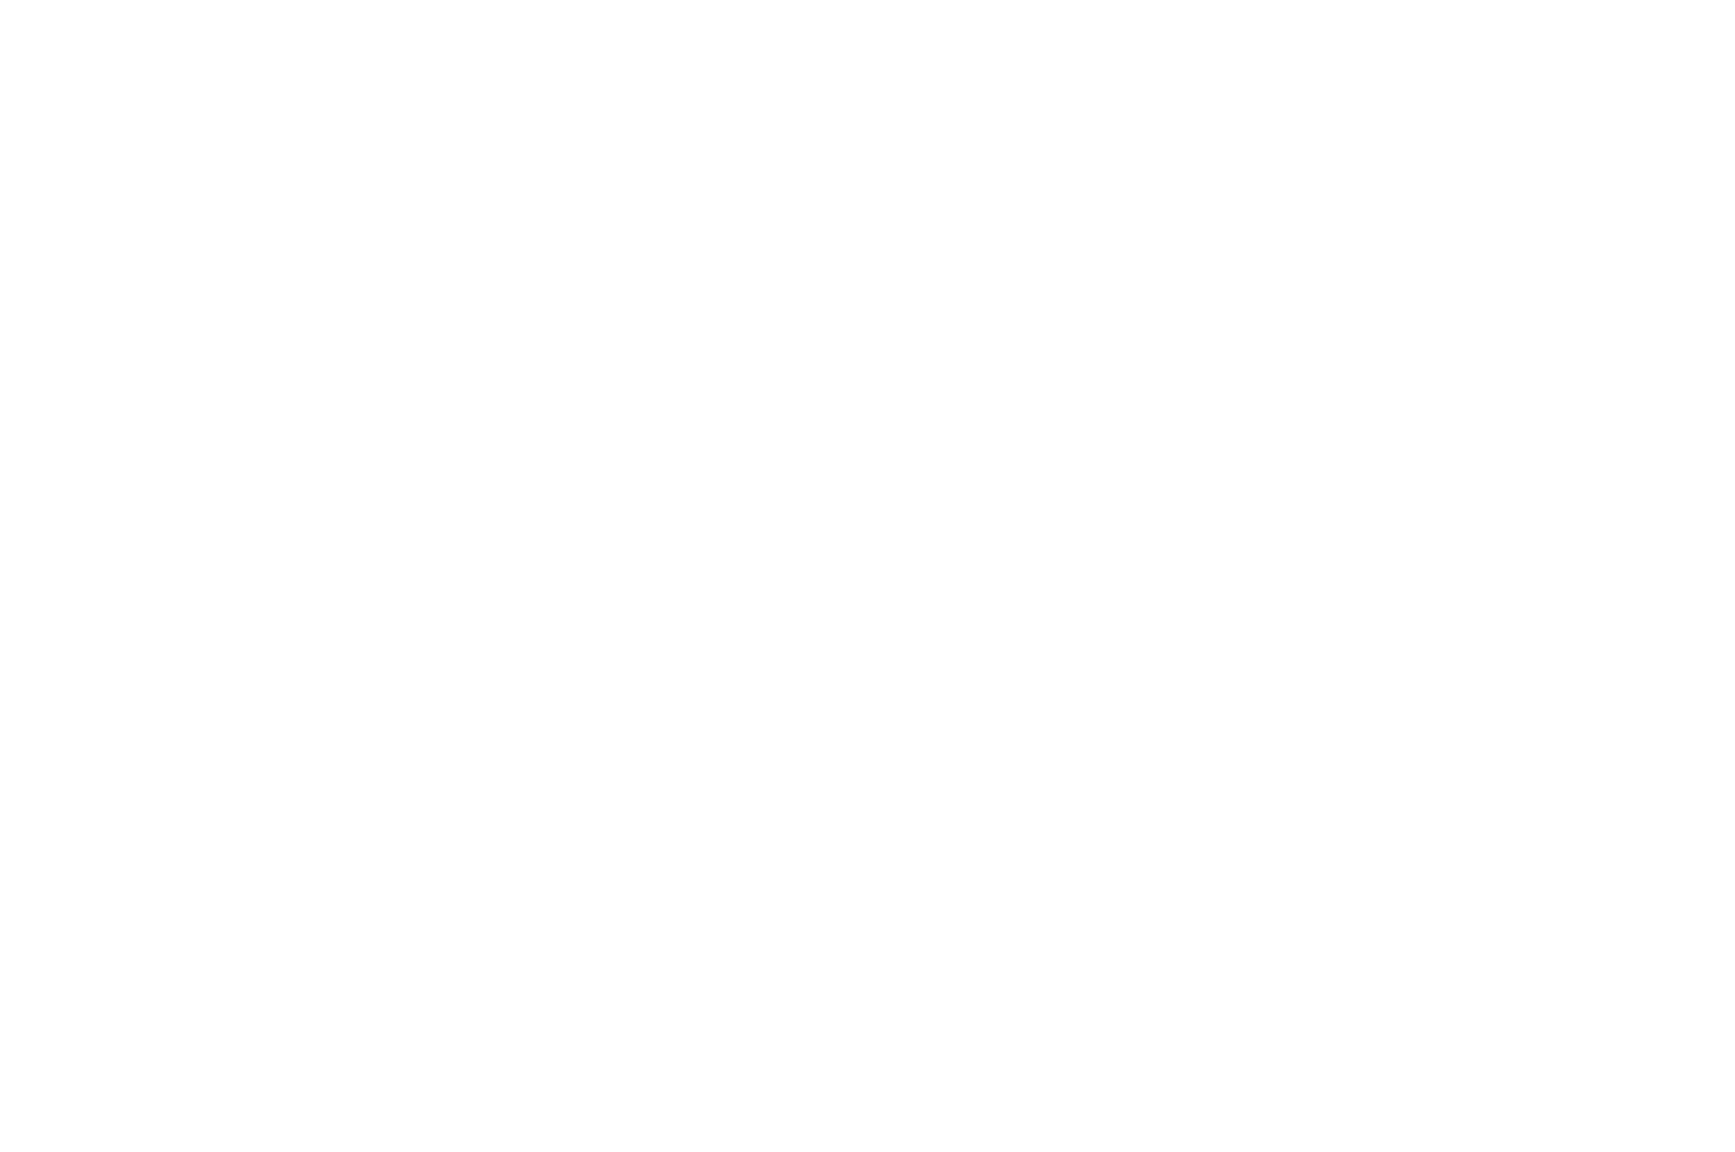 OFFICIAL SELECTION - POSTER - Turnpike Film Festival - 2020.png